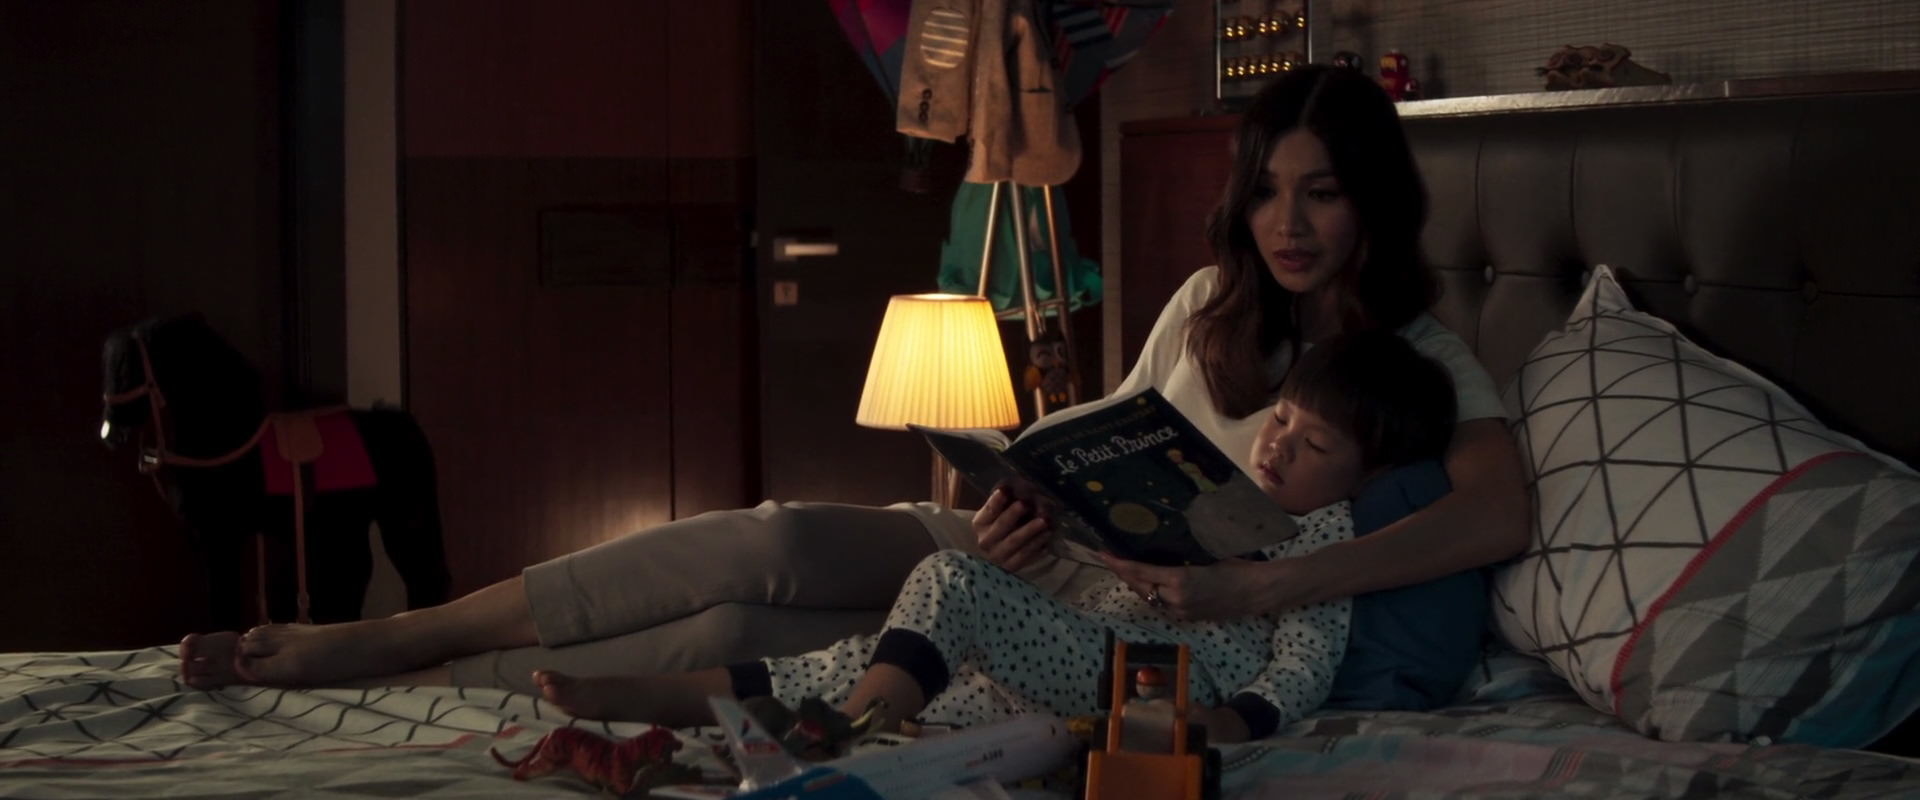 A character reading a book to a child in bed, and neither person has shoes on